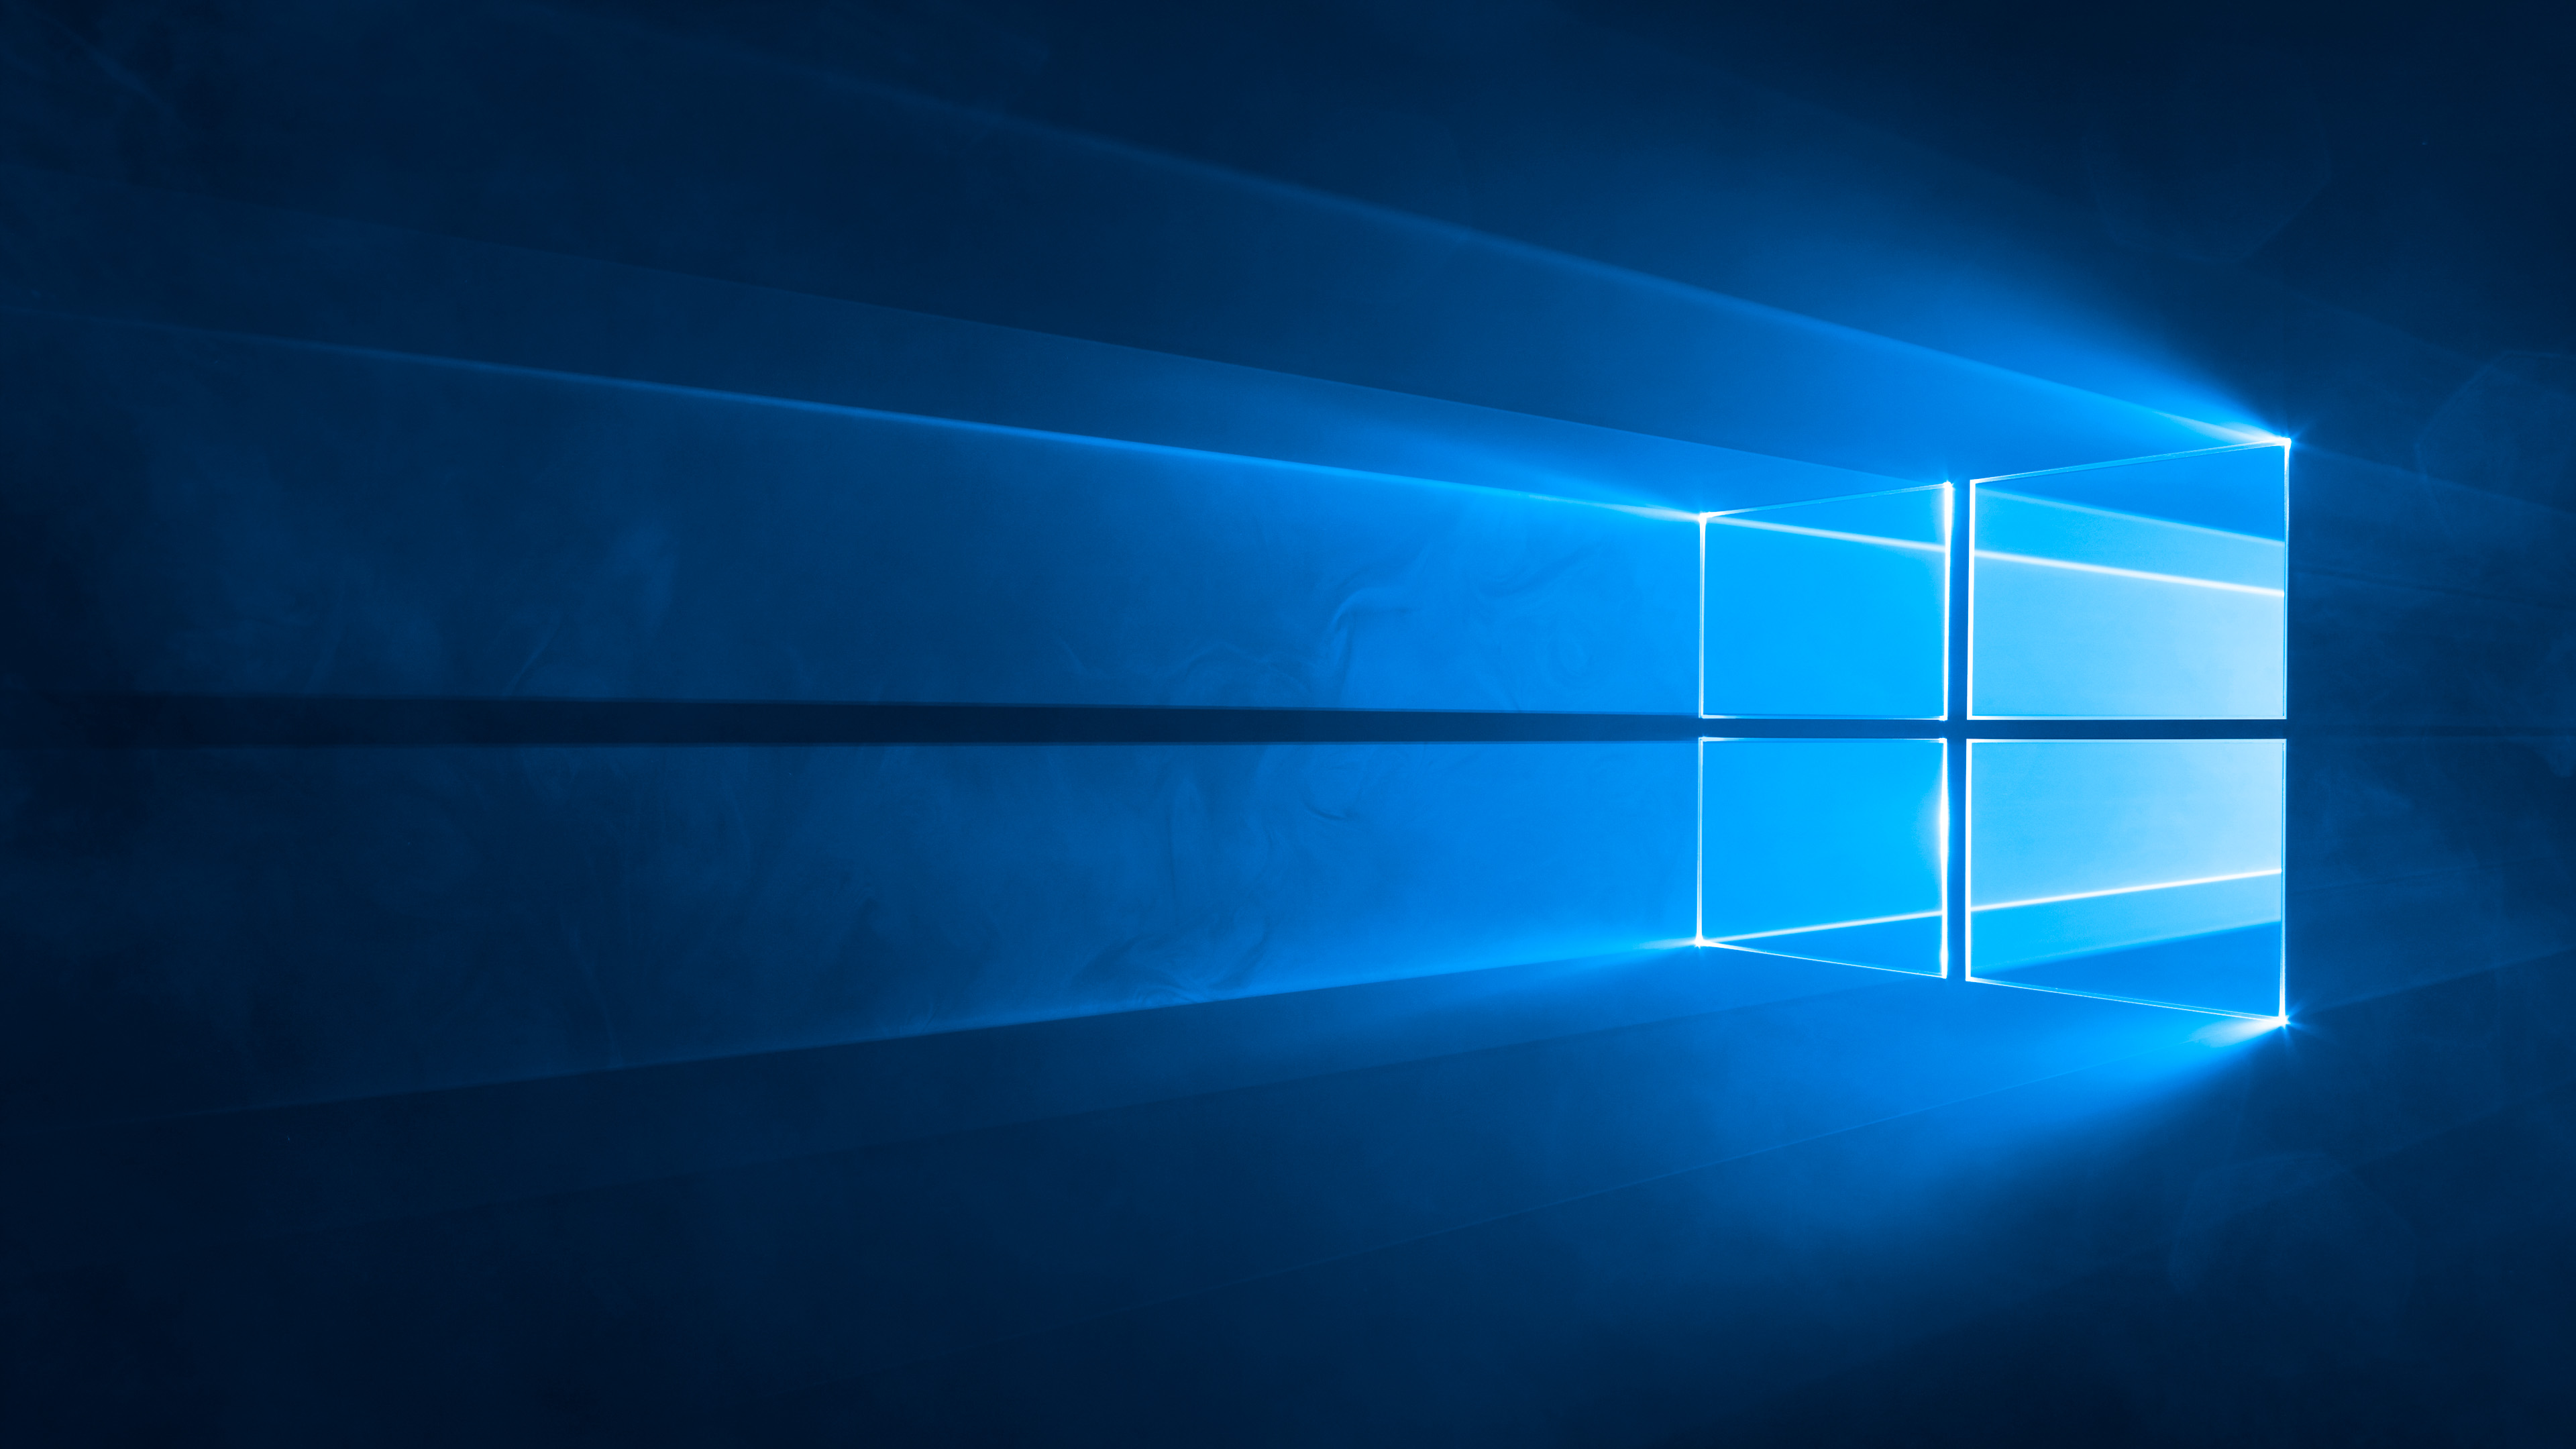 I Changed The Colour Of Windows Wallpaper